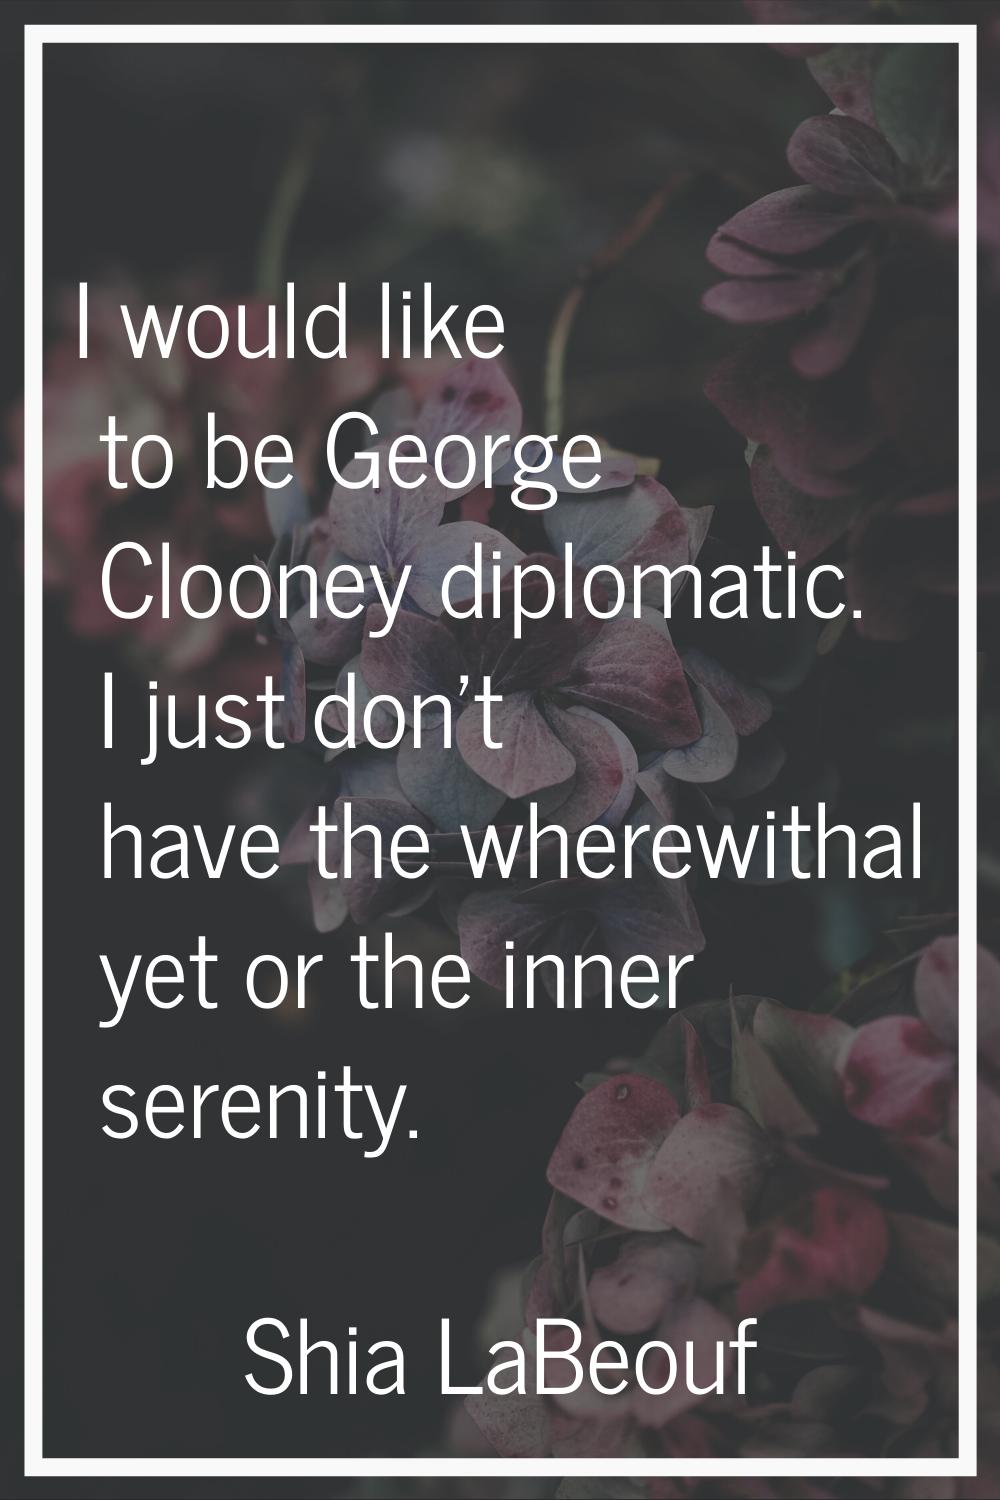 I would like to be George Clooney diplomatic. I just don't have the wherewithal yet or the inner se